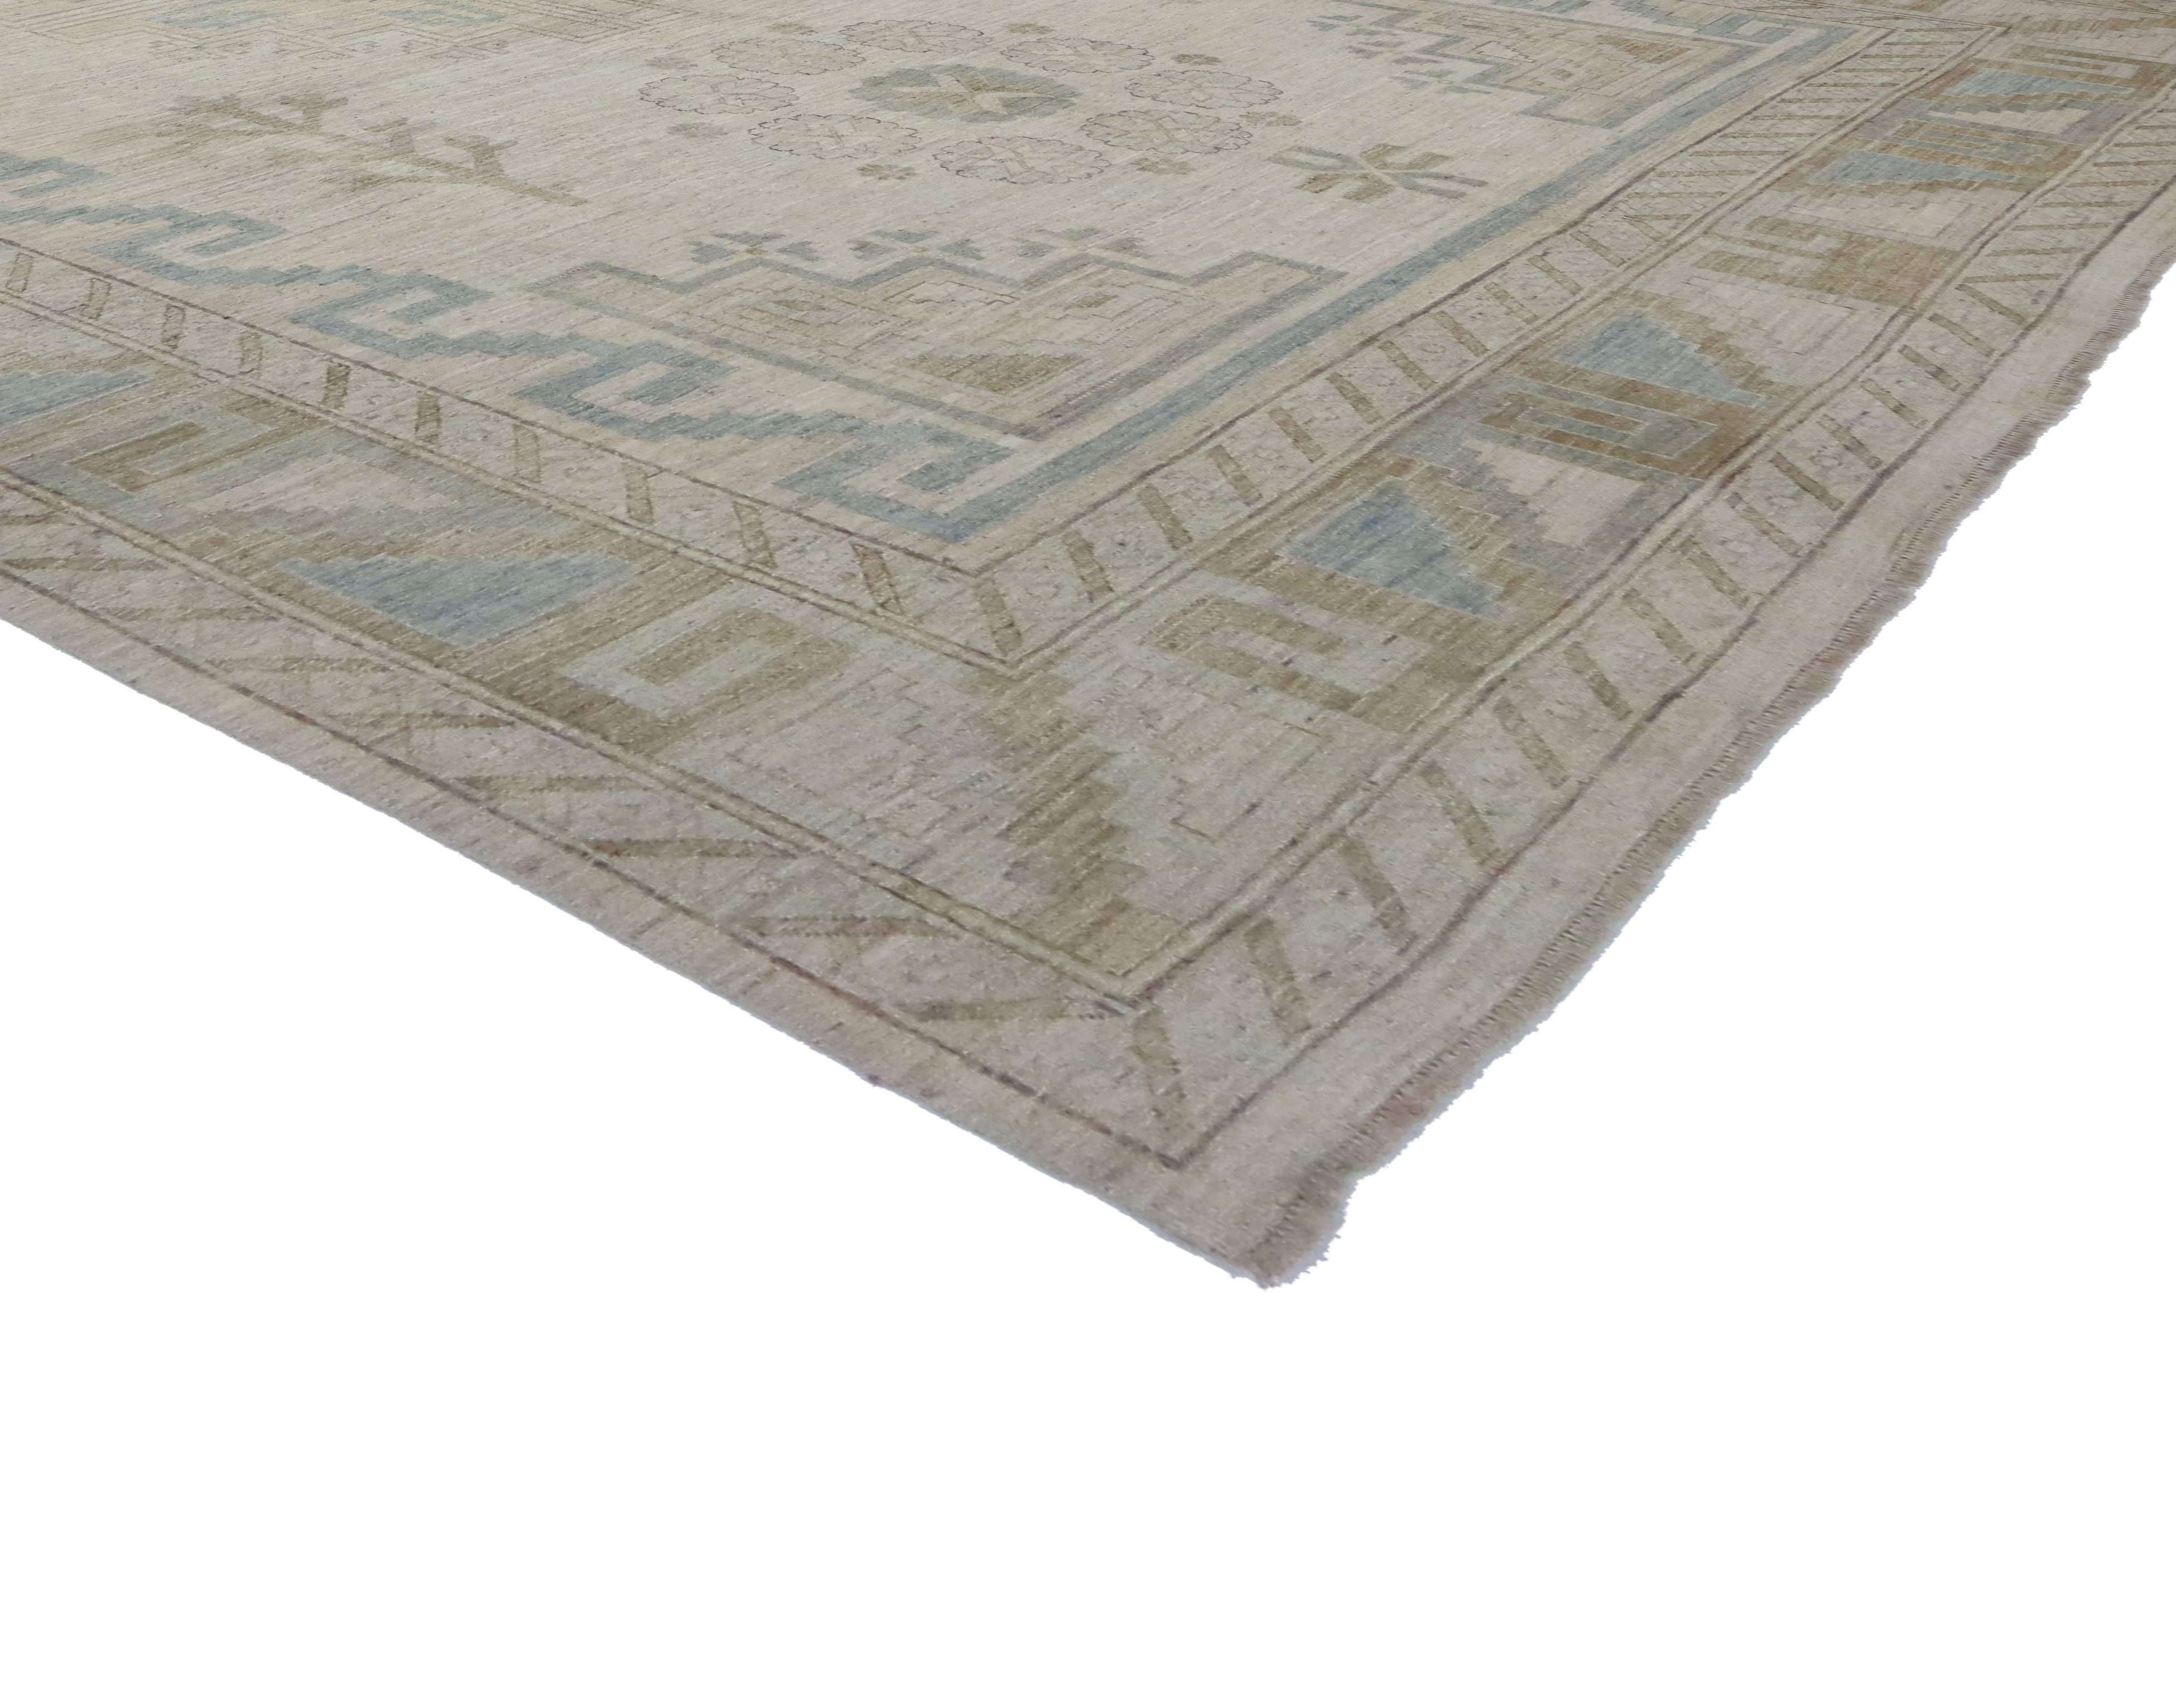 New Transitional Area Rug with Khotan Design in Warm, Neutral Colors 2